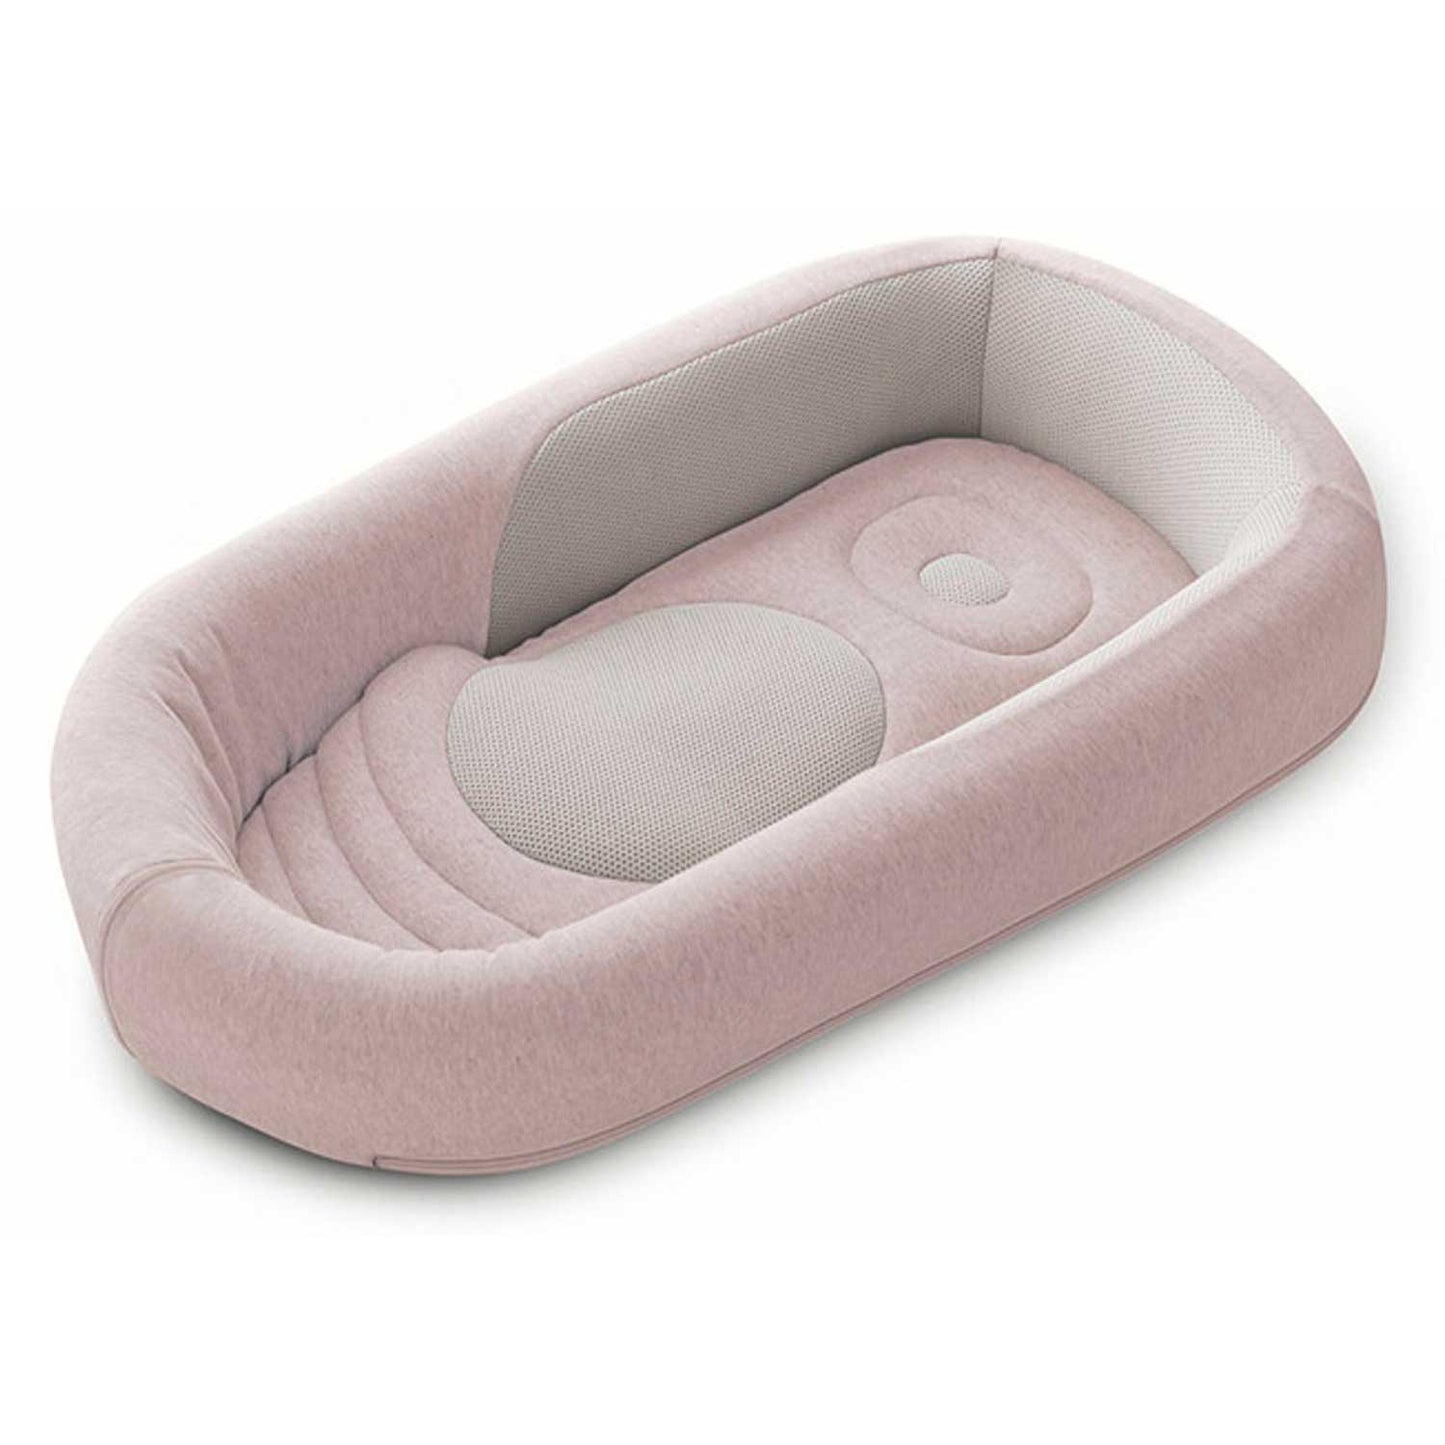 Inglesina - Cradle reducer and baby bed Welcome Pod